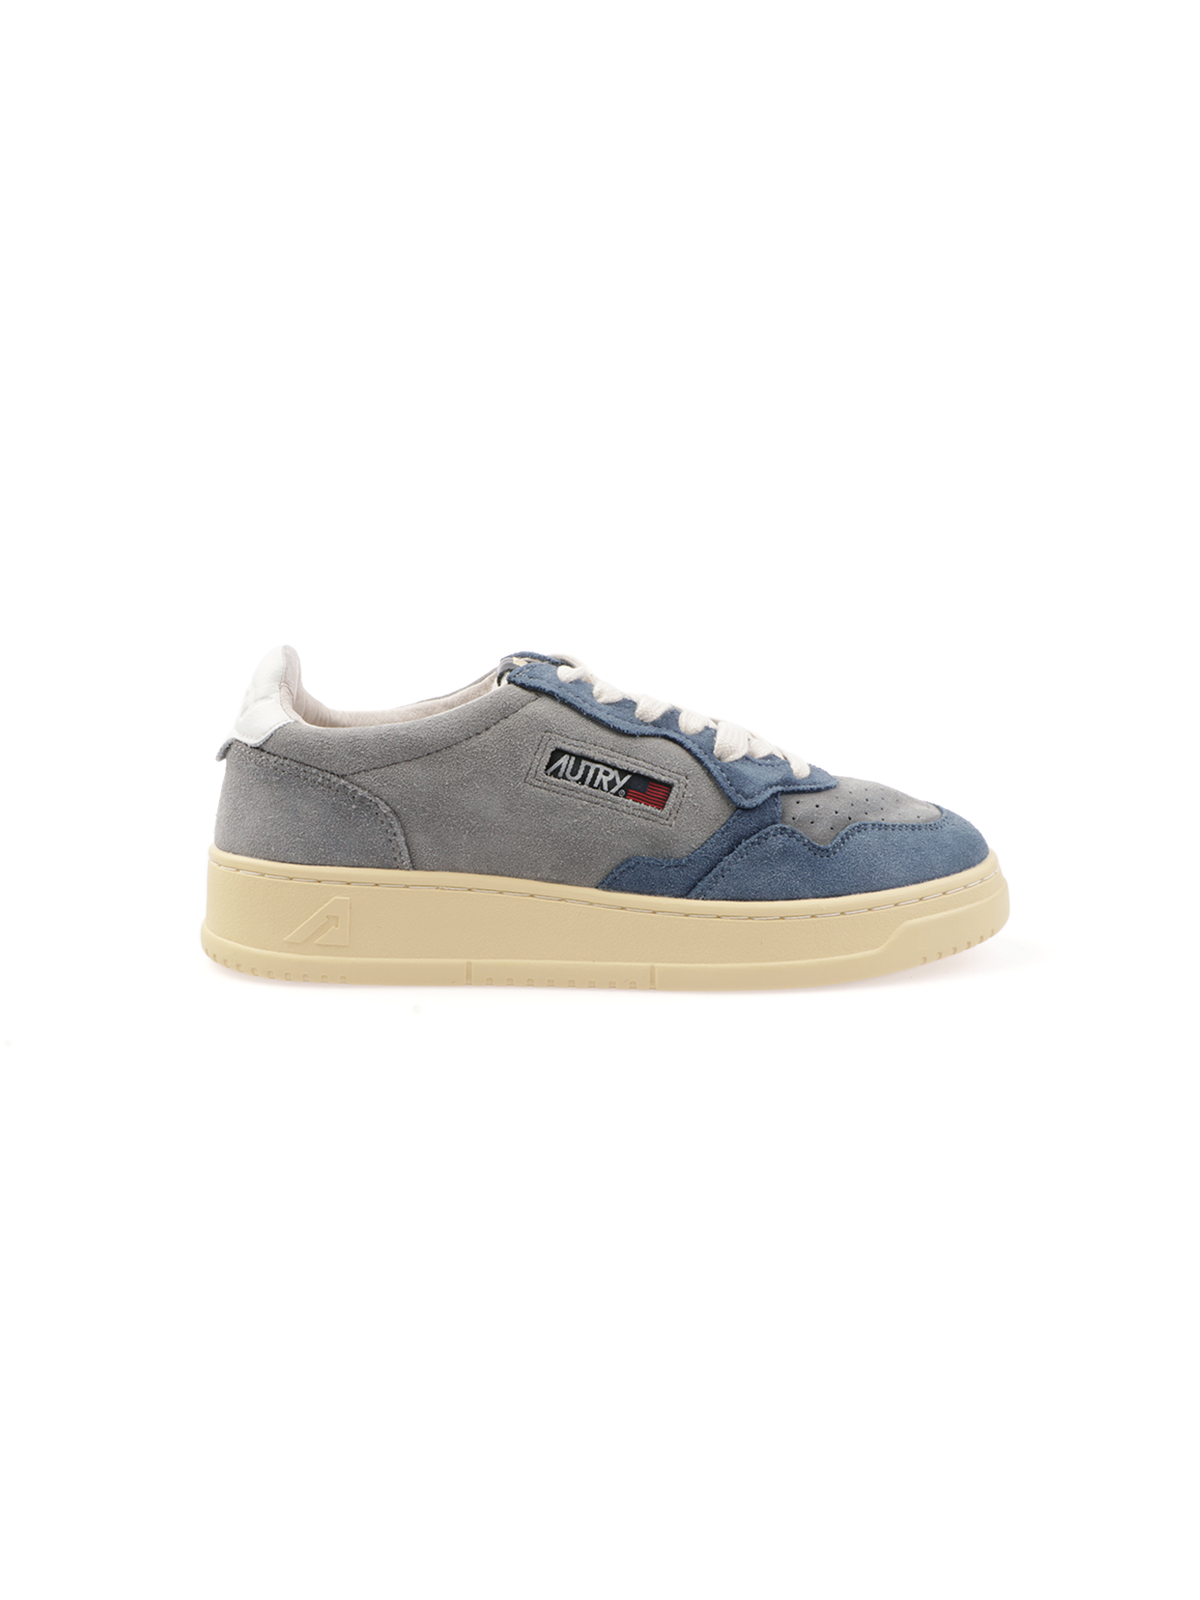 Immagine di AUTRY | Sneakers Donna Medalist Low in Suede